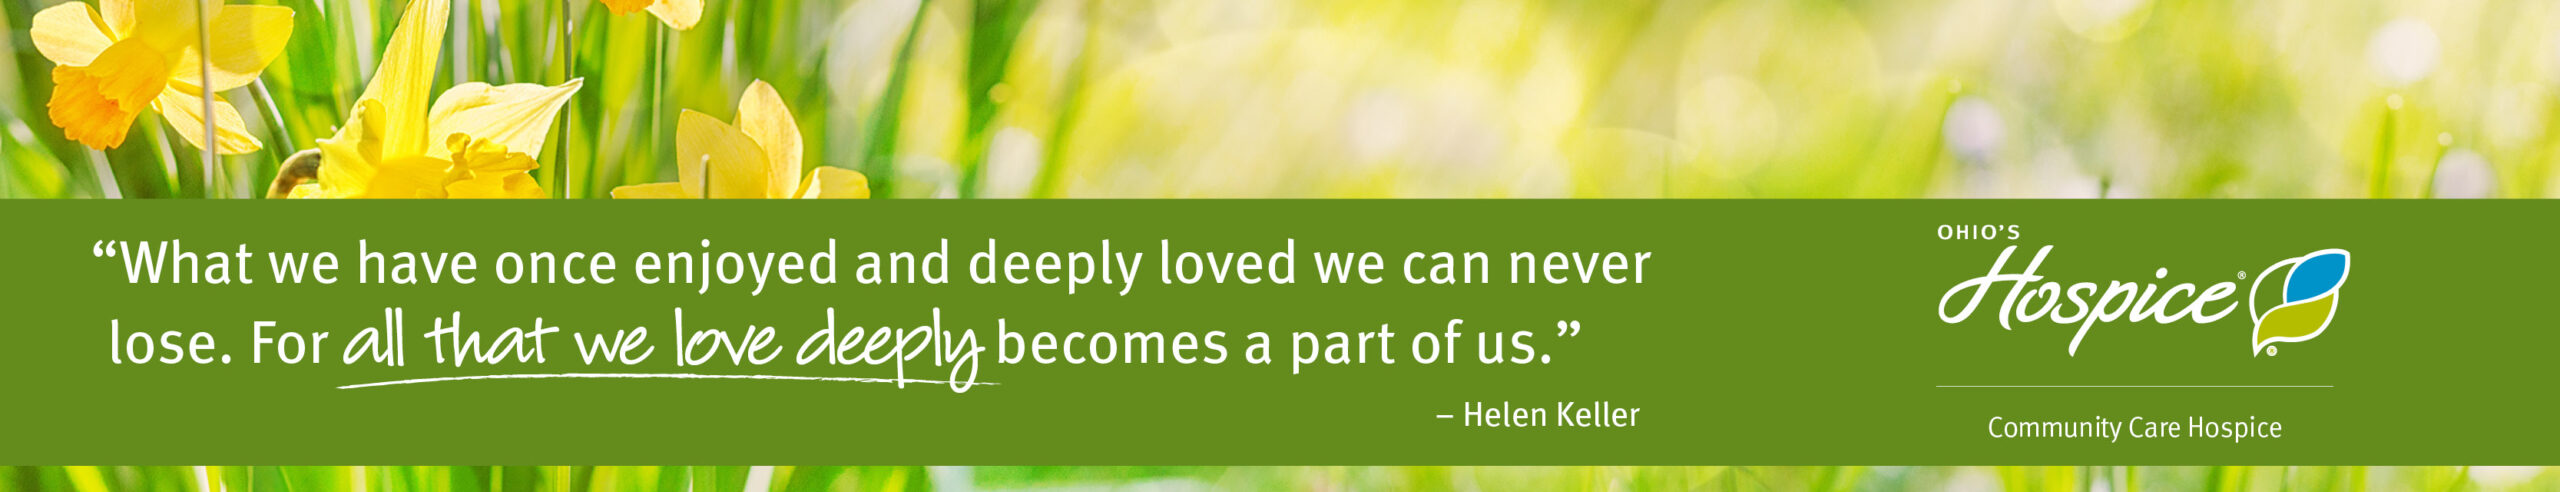 "What we have once enjoyed and deeply loved we can never lose. For all that we love deeply becomes a part of us." - Helen Keller. Community Care Hospice